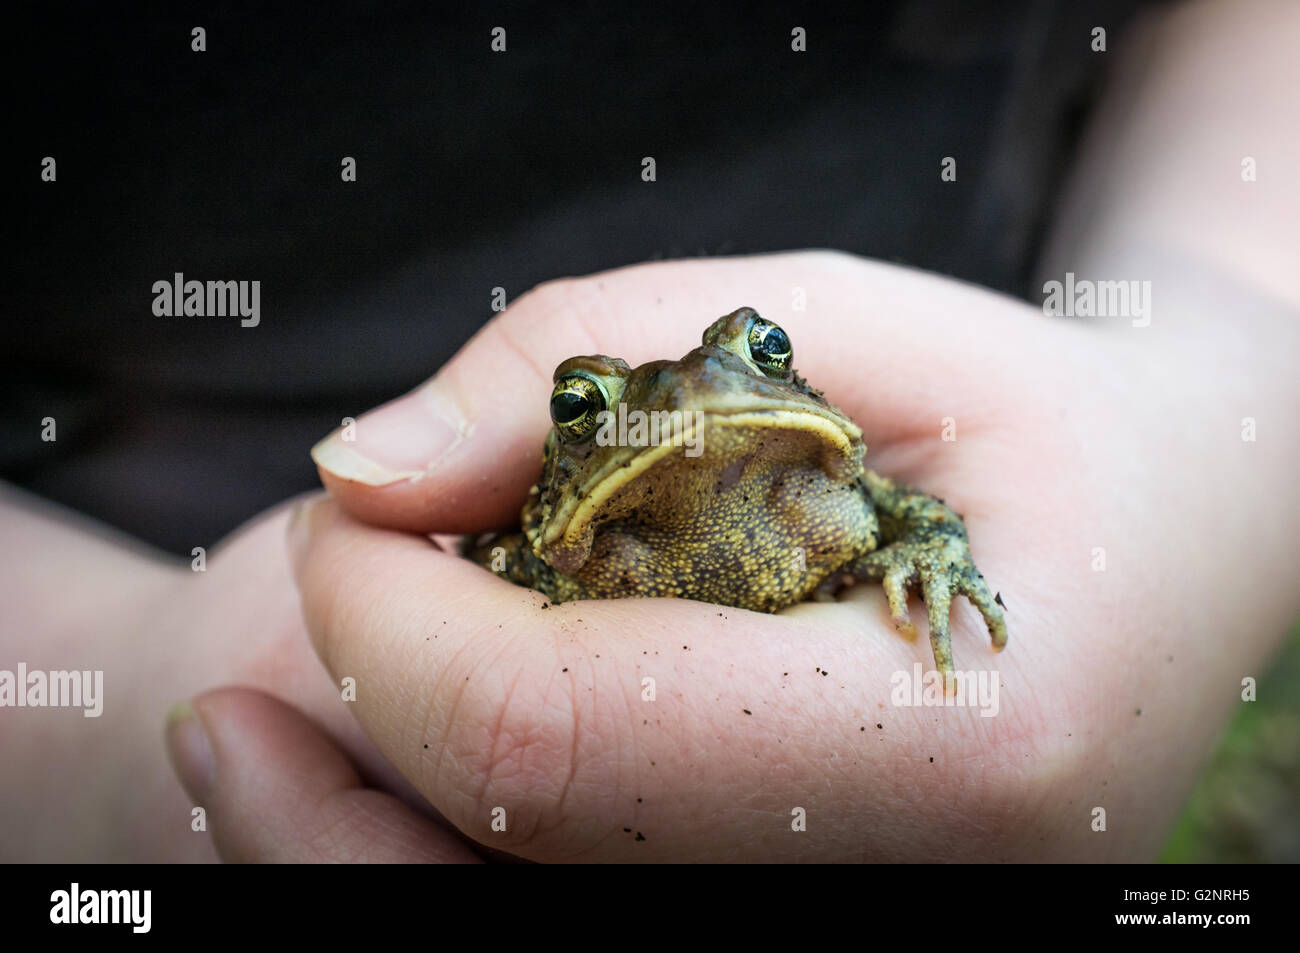 Gentle hands hold captive grumpy Eastern American toad Stock Photo